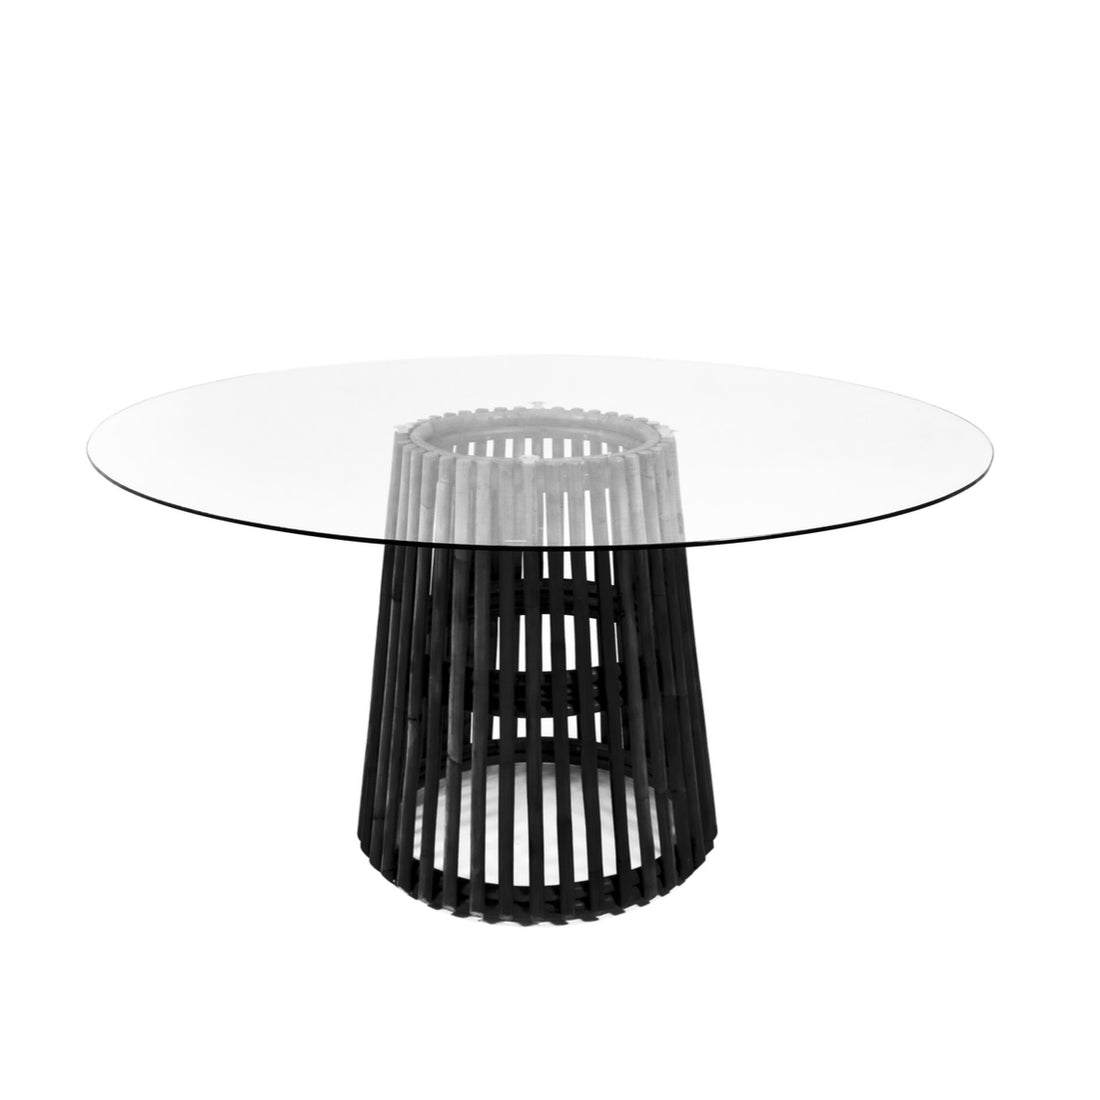 Delilah Dining Table with 150cm dia in Rattan Black